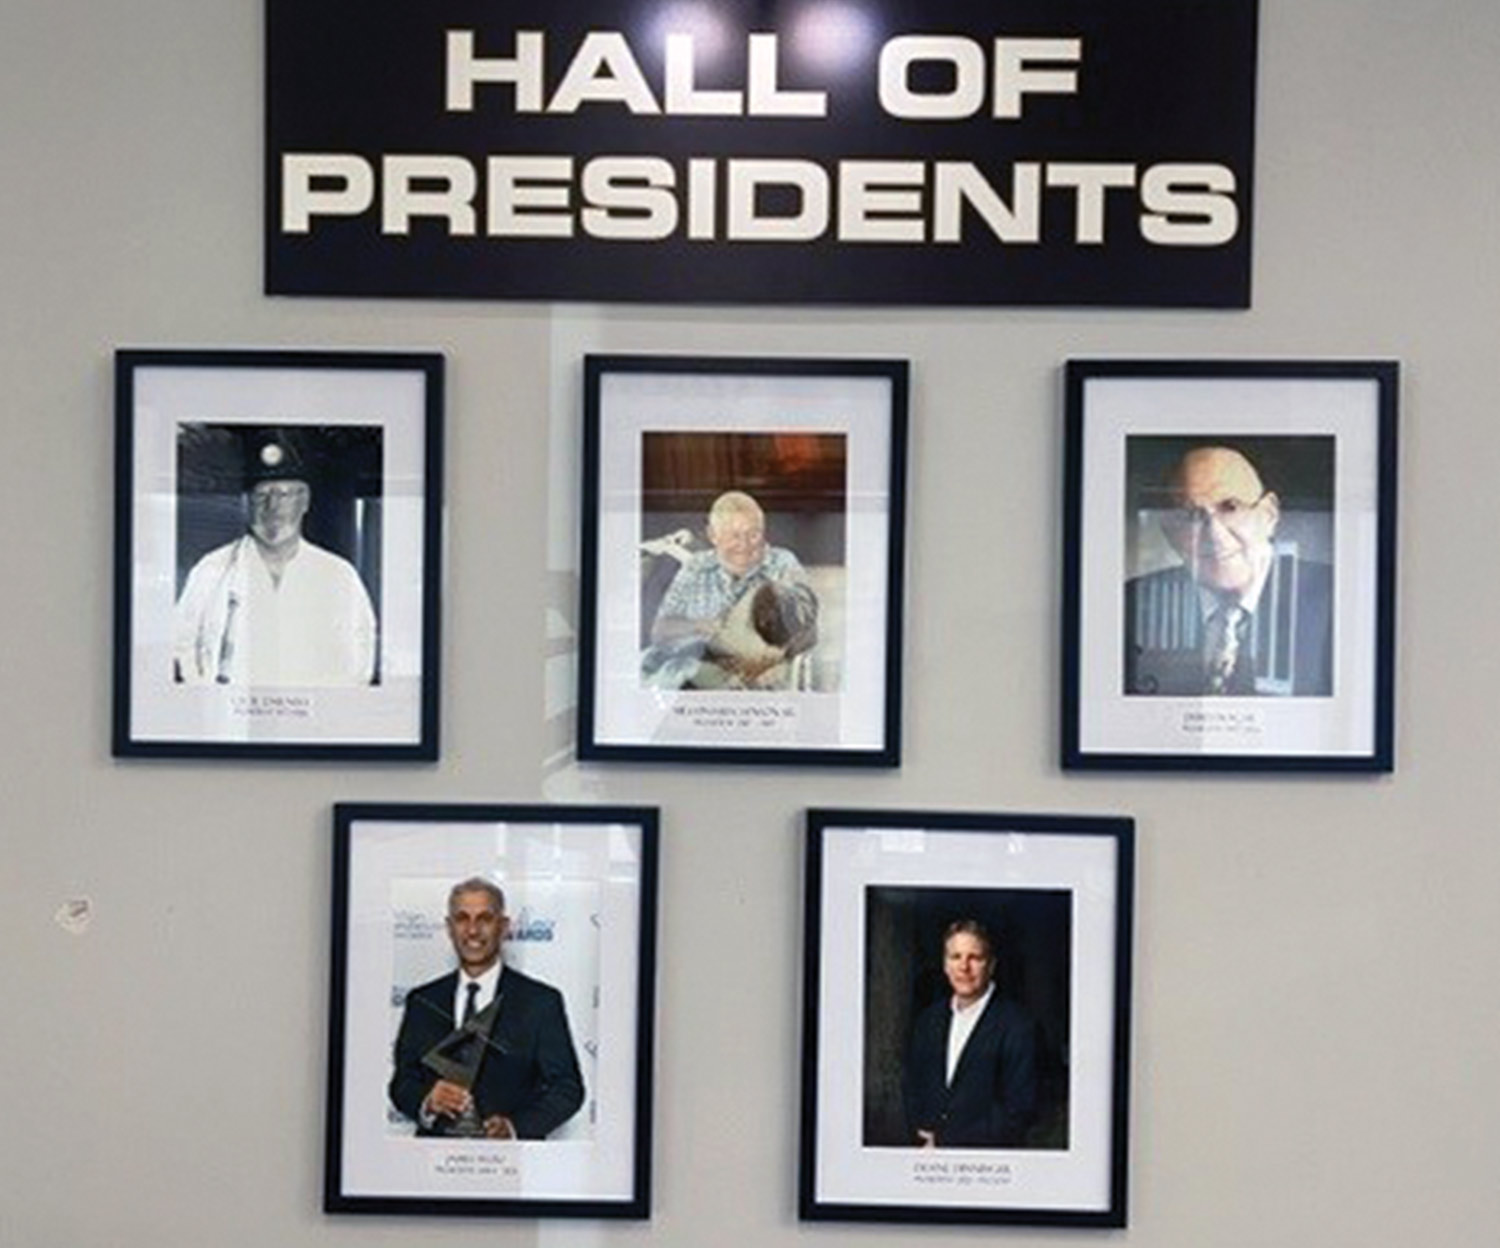 a wall with the sign "Hall of Presidents" and five frames hanging below